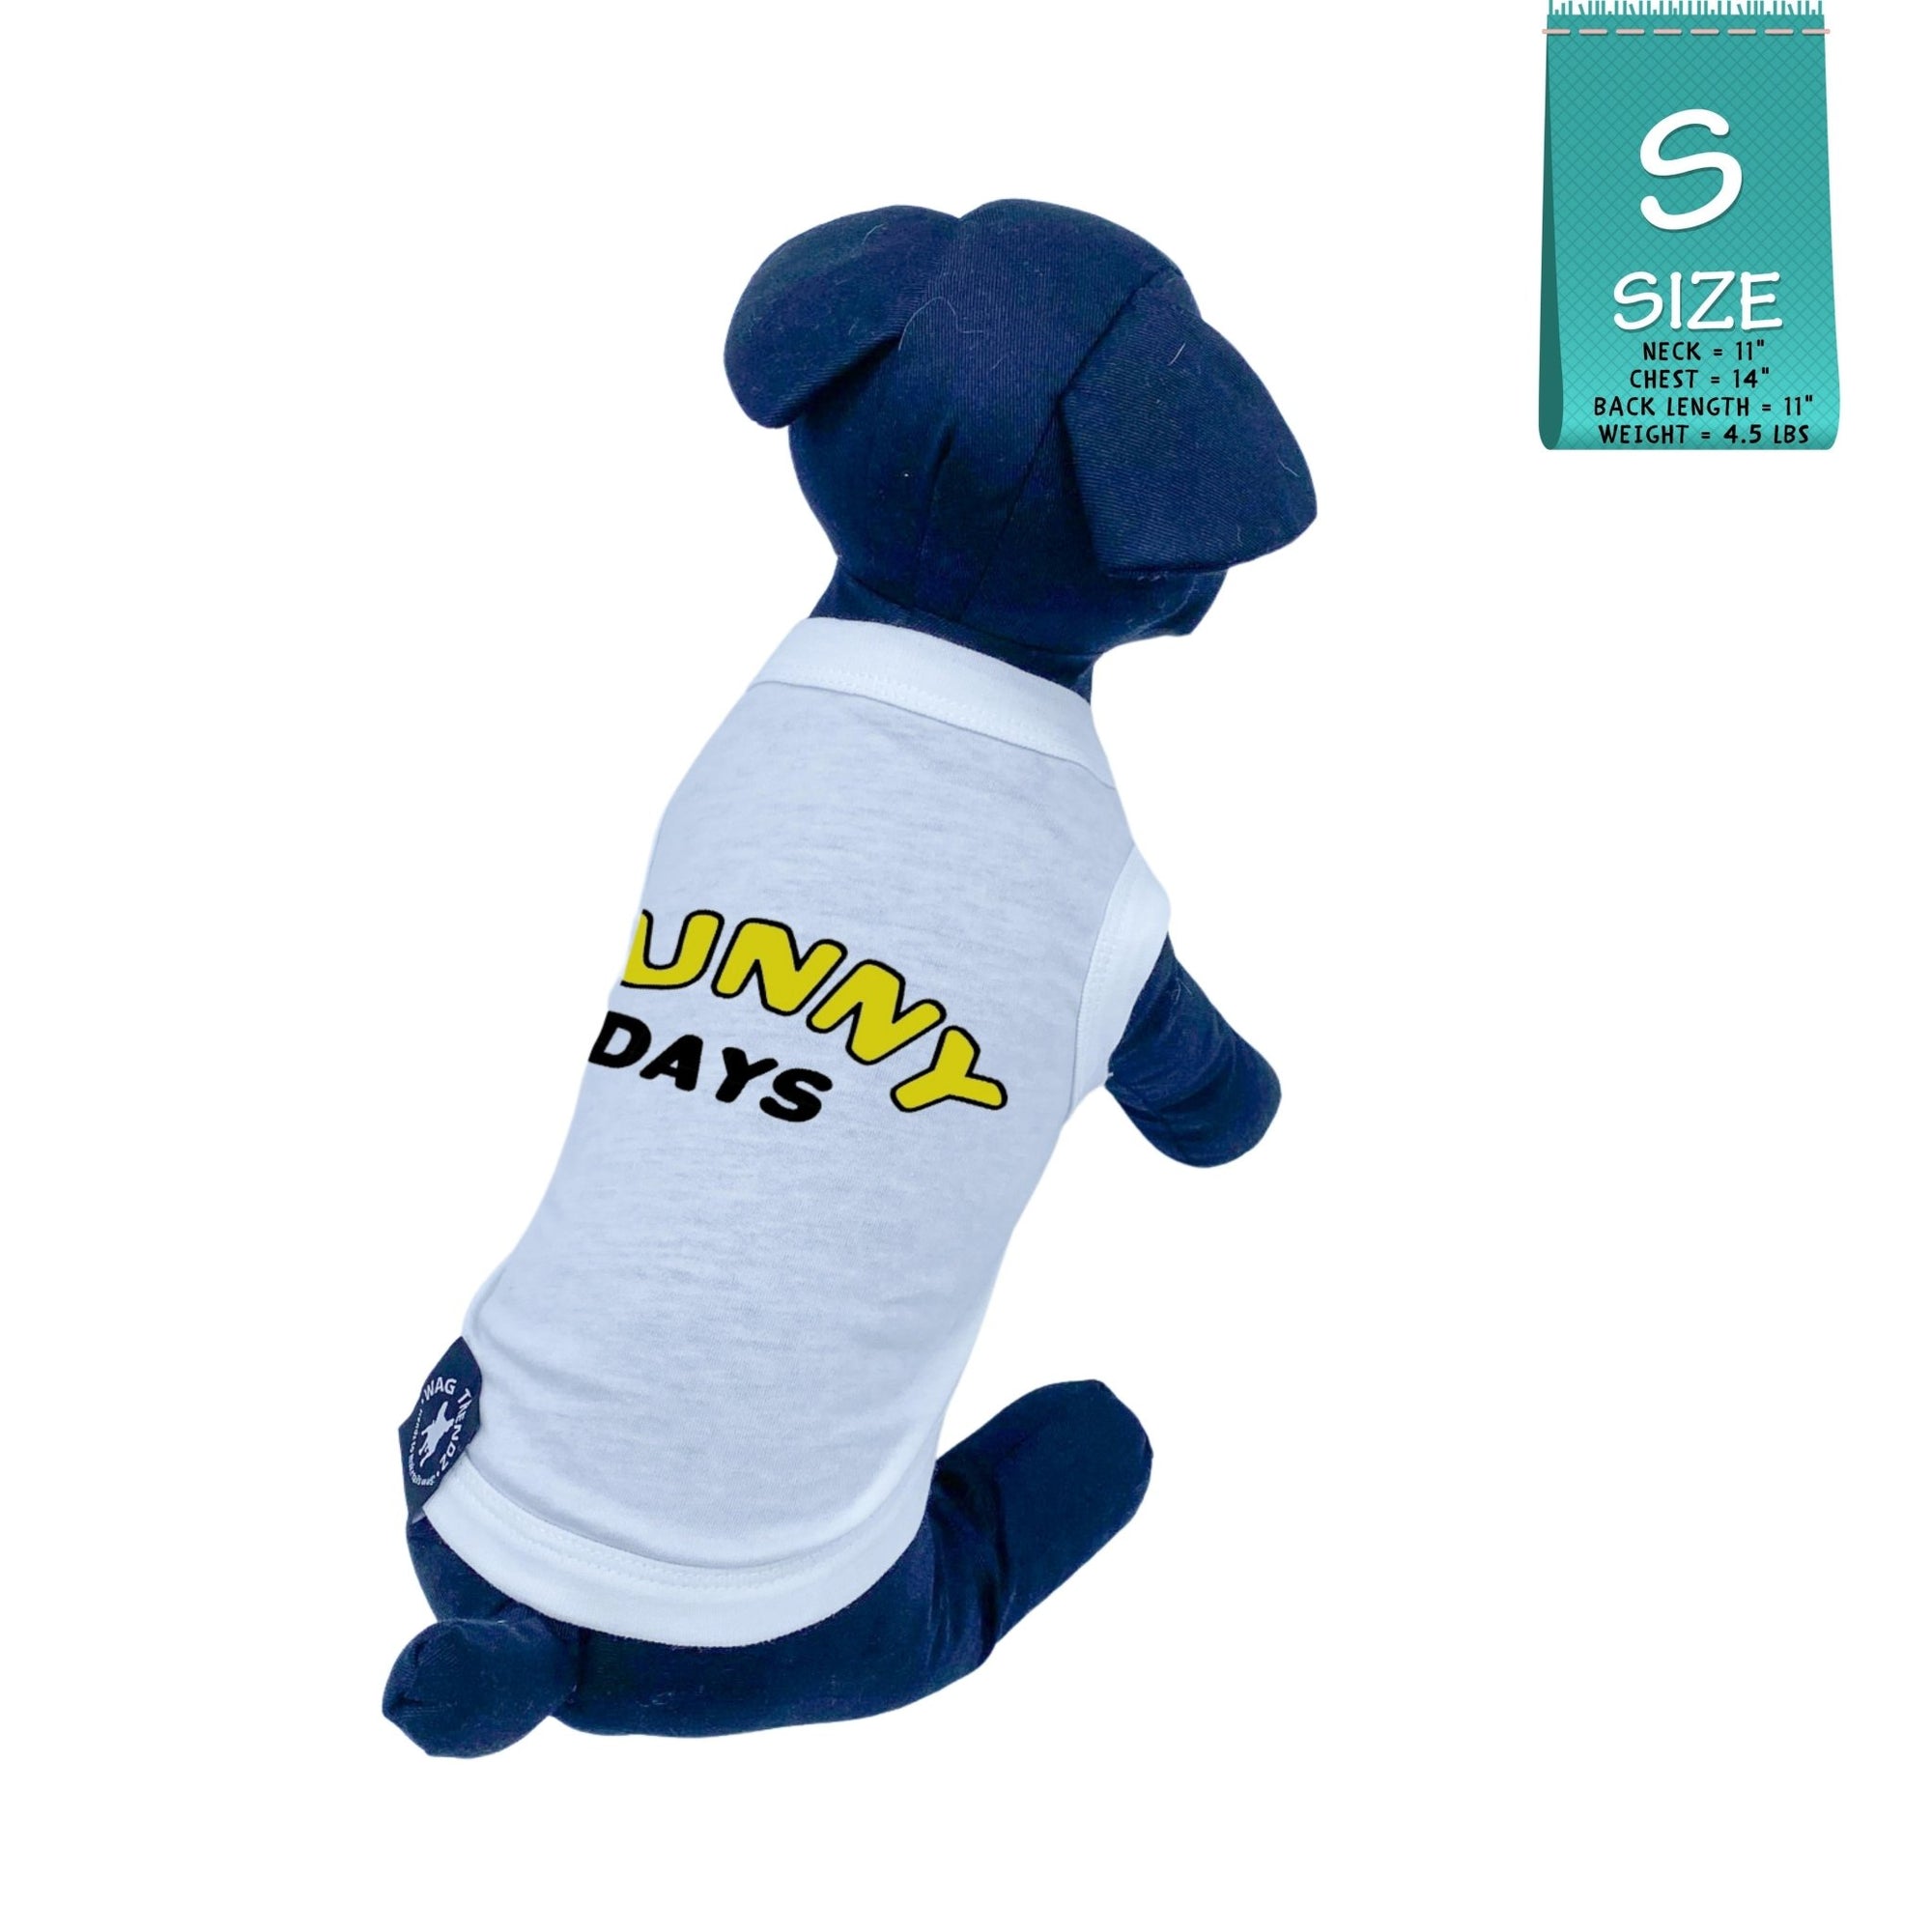 Dog T-Shirt - black stuffed dog wearing white &quot;Sunny Days&quot; dog t-shirt - Sunny Days lettering in yellow and black - against solid white background - Wag Trendz